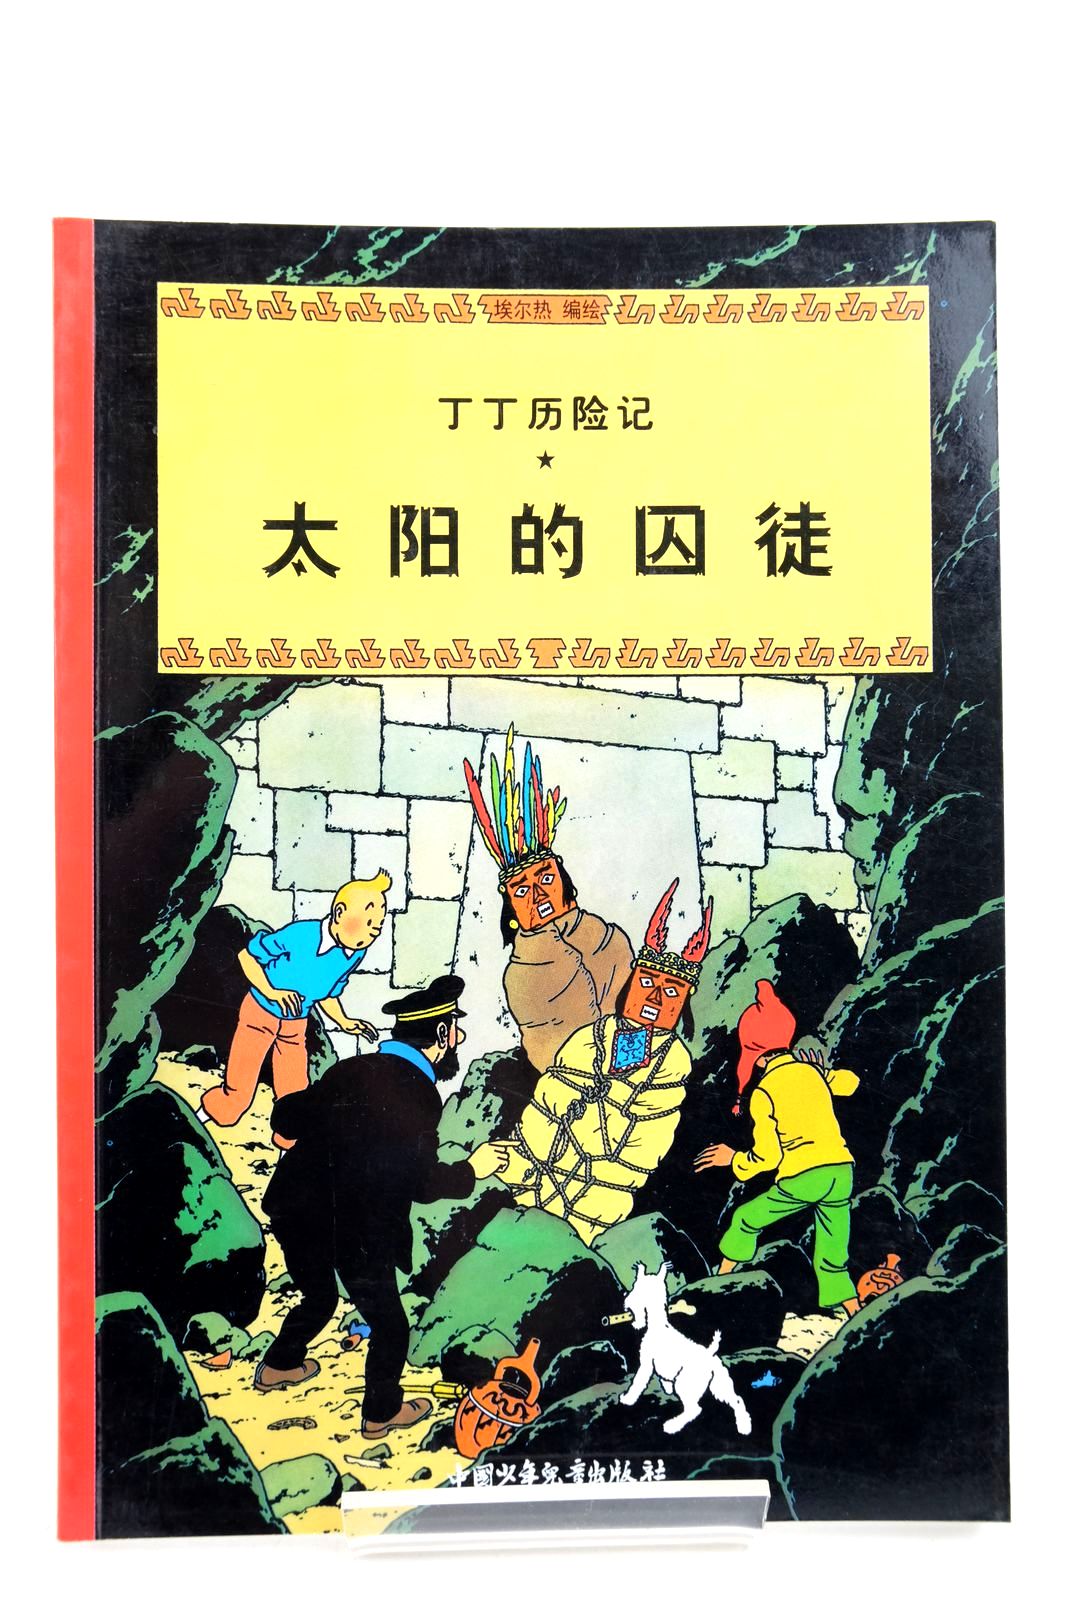 Photo of THE ADVENTURES OF TINTIN: PRISONERS OF THE SUN (CHINESE LANGUAGE EDITION) written by Herge, illustrated by Herge, published by China Press (STOCK CODE: 2140354)  for sale by Stella & Rose's Books